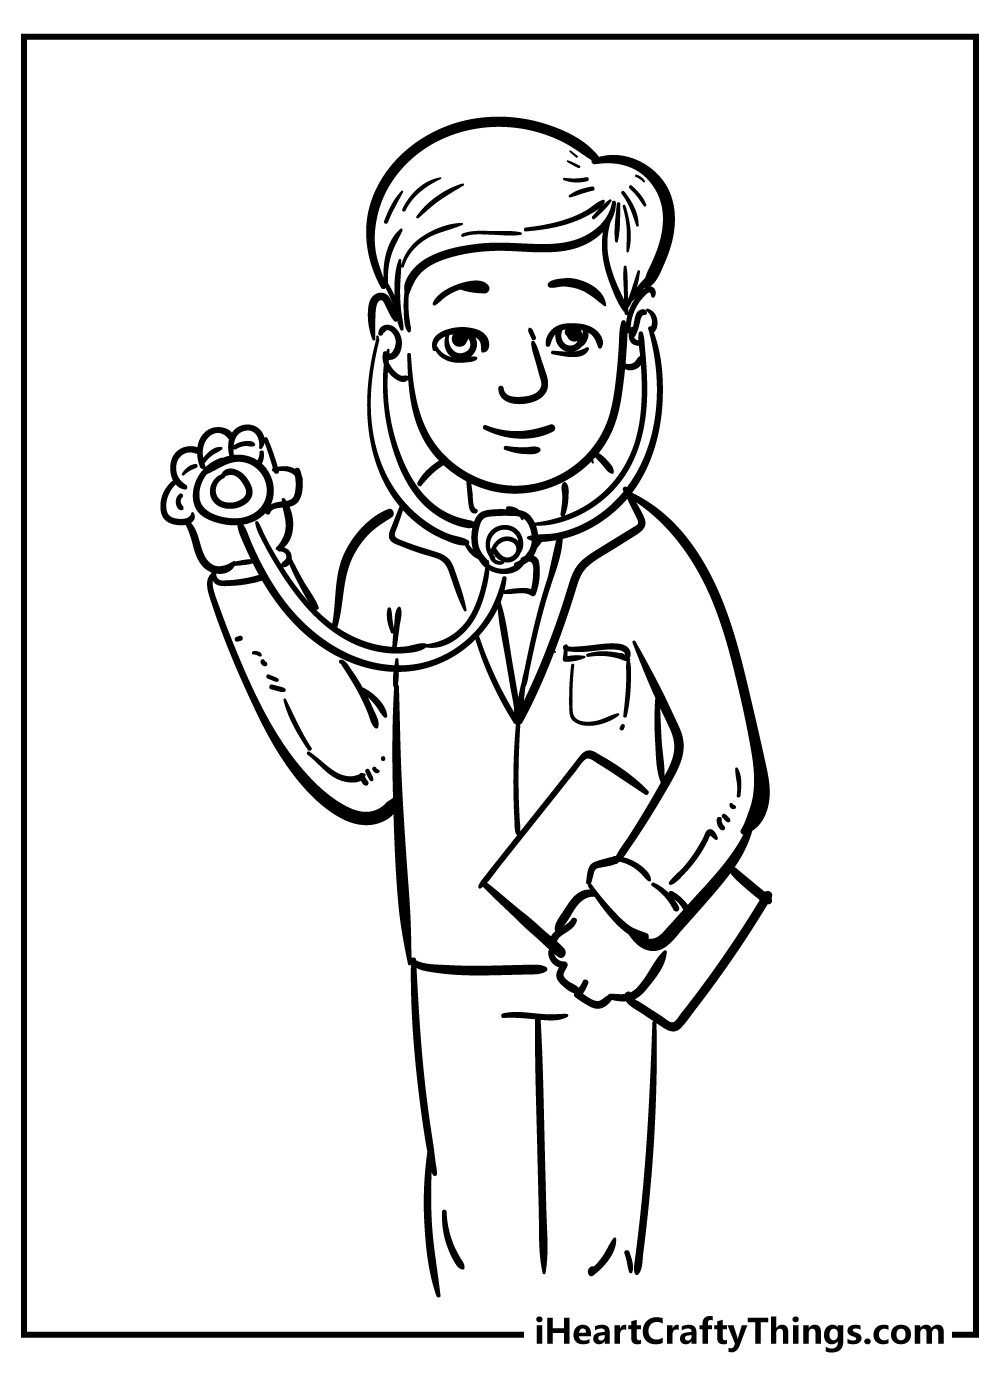 Doctor Coloring Book for adults free download